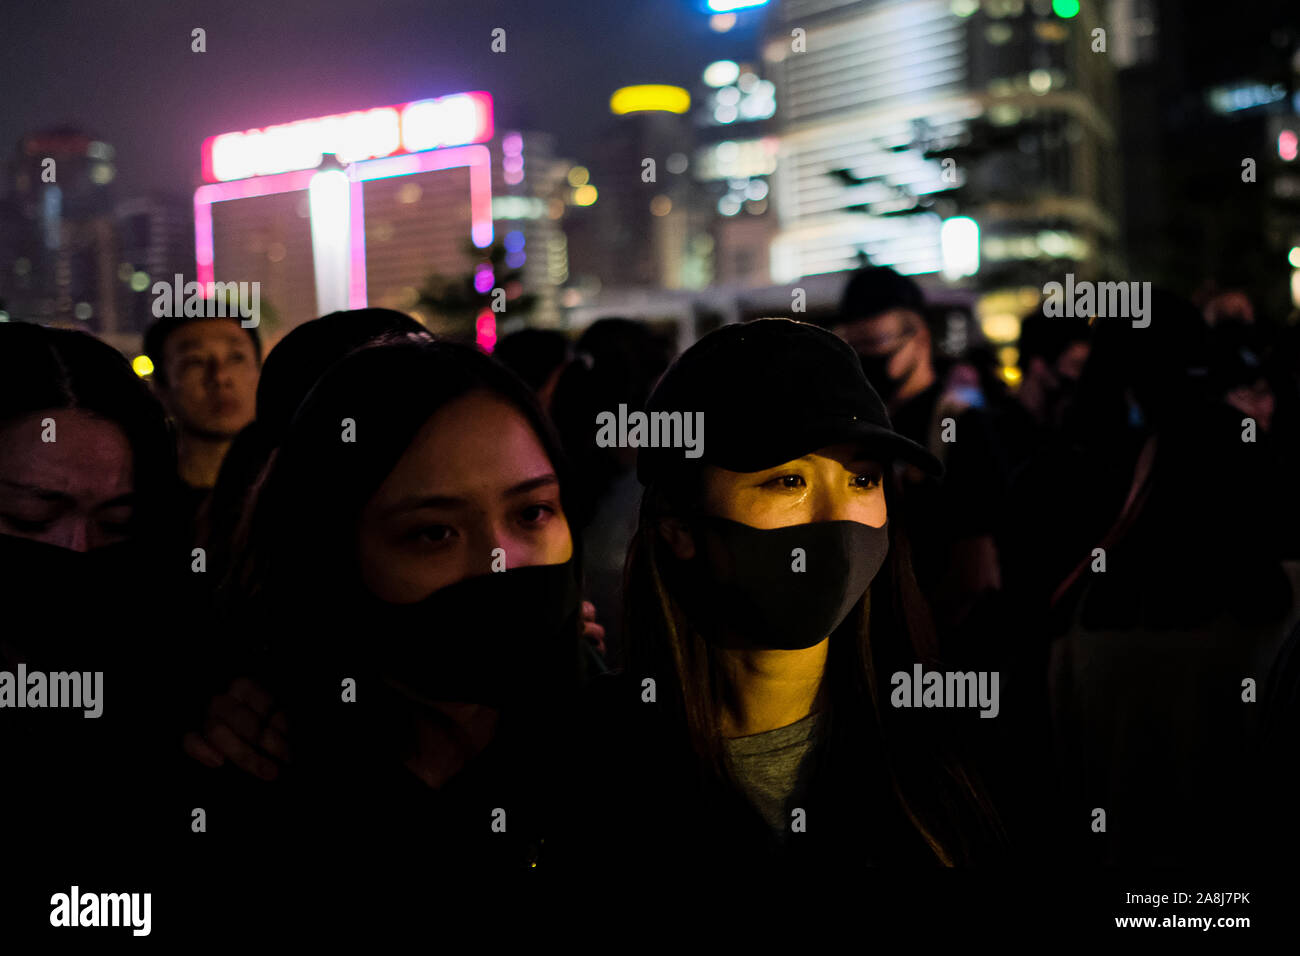 Hong Kong, China. 9th Nov, 2019. Tens of thousands of Hong Kongers participate during a memorial rally at Tamar Park in Hong Kong to mourn the death of a 22 years old university student Alex Chow Tsz Lok, who died from a serious brain injury during a fall on November 4th as police skirmished with demonstrators last weekend. He was left in critical condition and died after suffering a cardiac arrest on Friday. Credit: Keith Tsuji/ZUMA Wire/Alamy Live News Stock Photo